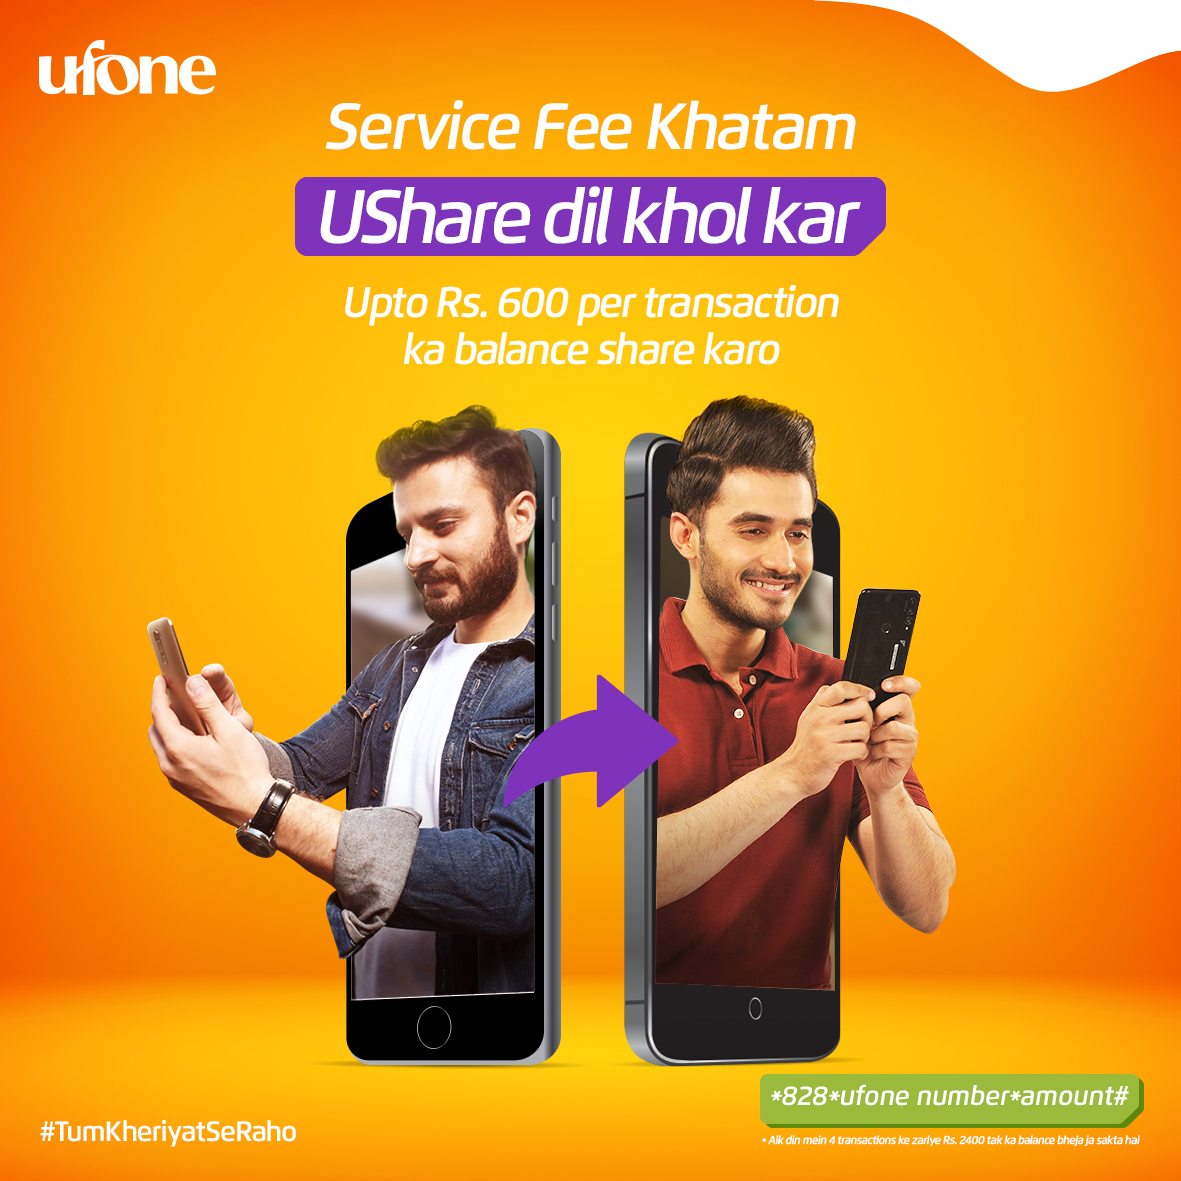 Ufone’s UShare service is now free of cost to allow easy sharing of balance during lockdown